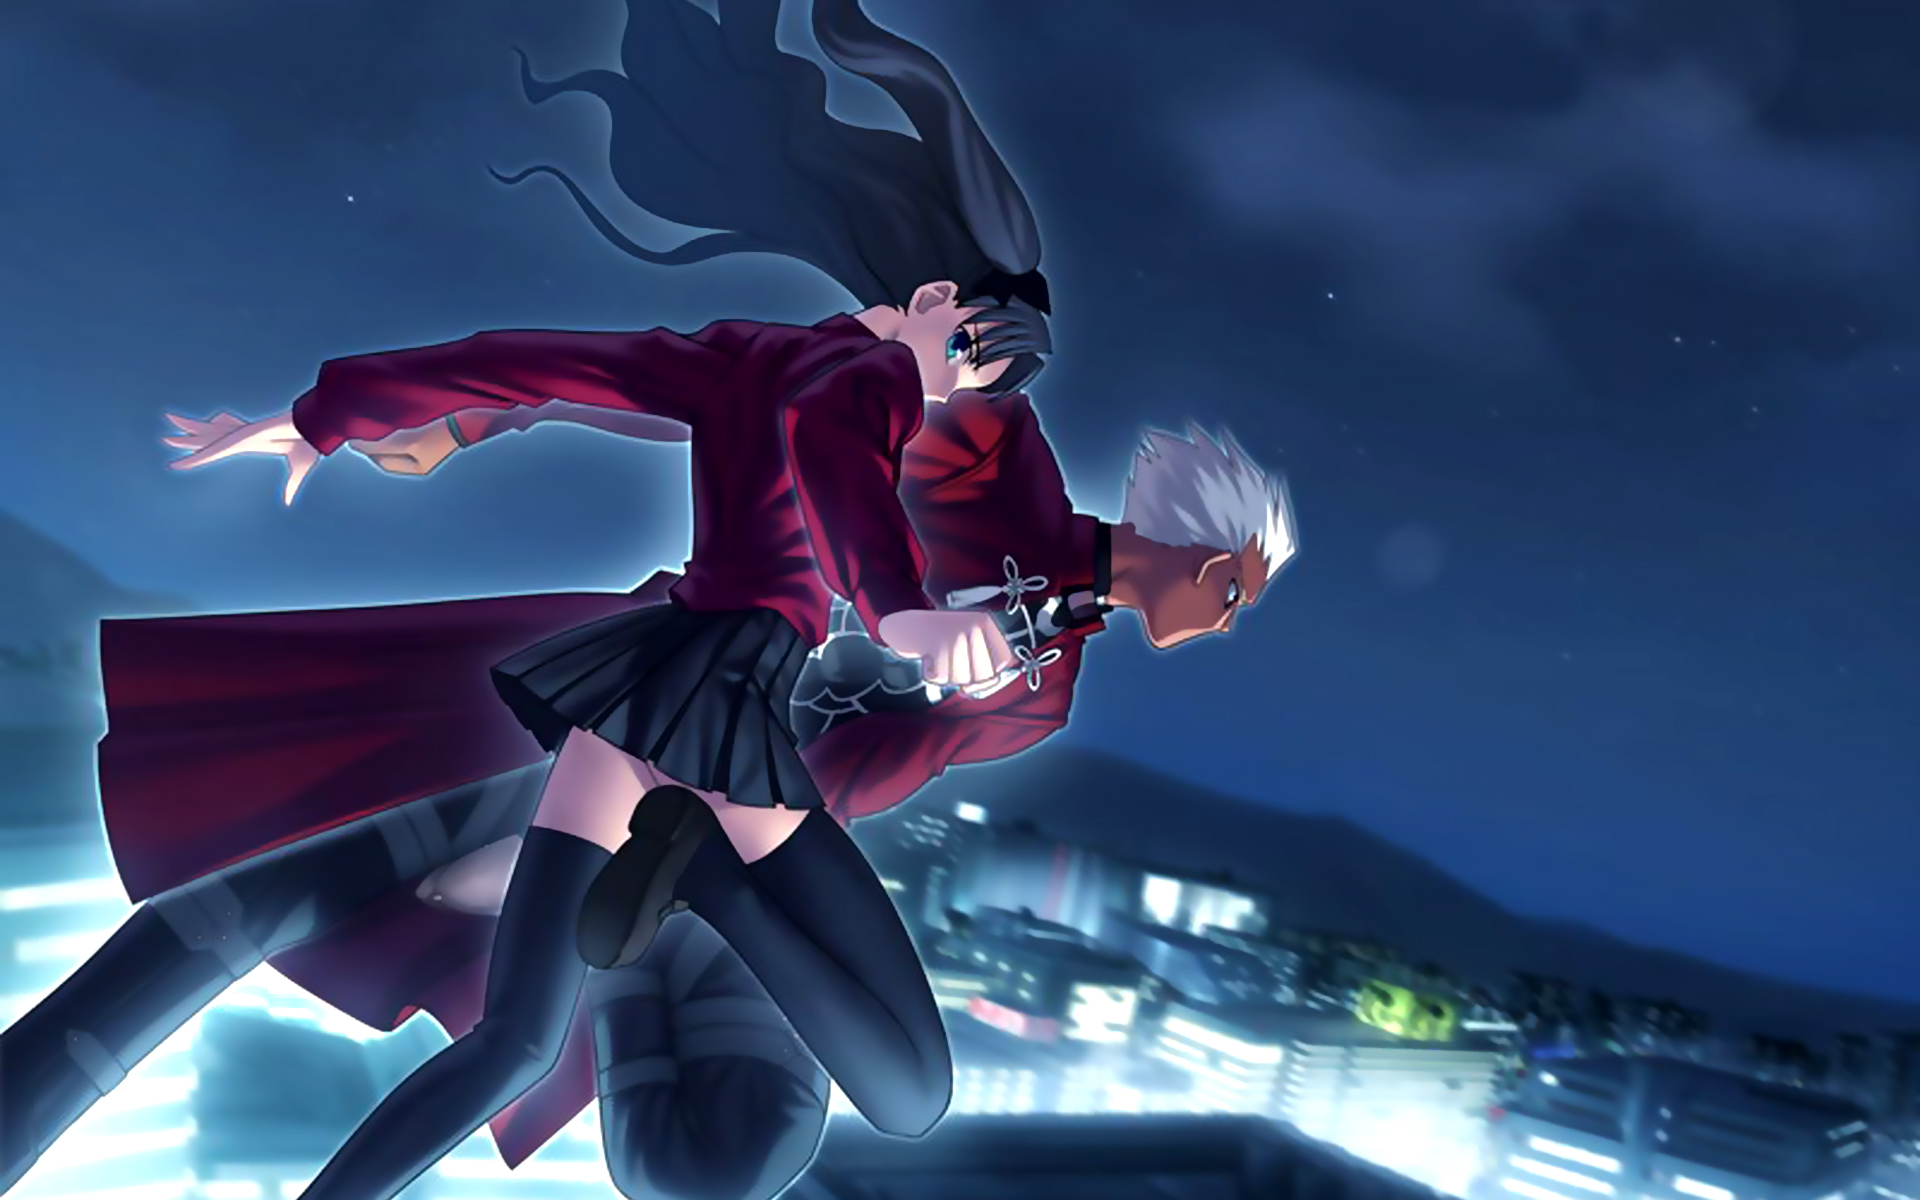 Rin Tohsaka and Archer from Fate/Stay Night in a captivating HD desktop wallpaper.